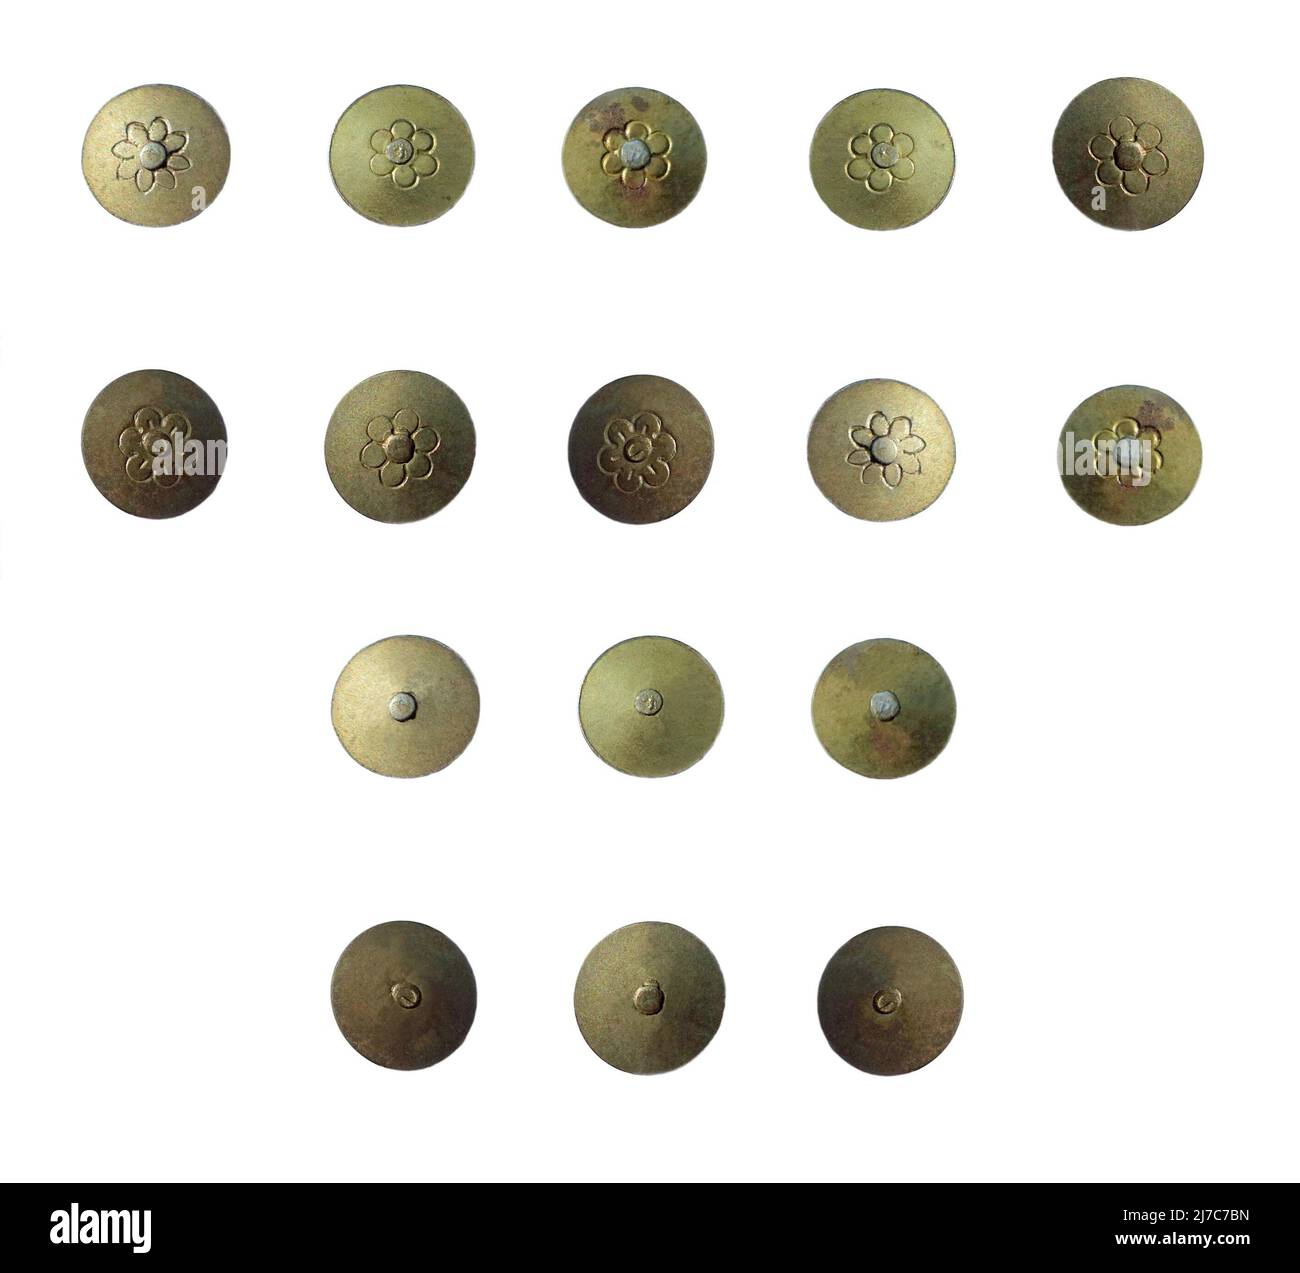 Old, retro or vintage metal drawing pins – push pins or thumb tacks – ‘pinned’ to a white background. These fixings have brass heads and an aged patina. They are suitable for using with other graphic material, for instance, used (small) in the corners of sheets of old paper and printed ephemera to give the effect of being attached and displayed on a wall or notice board. Stock Photo